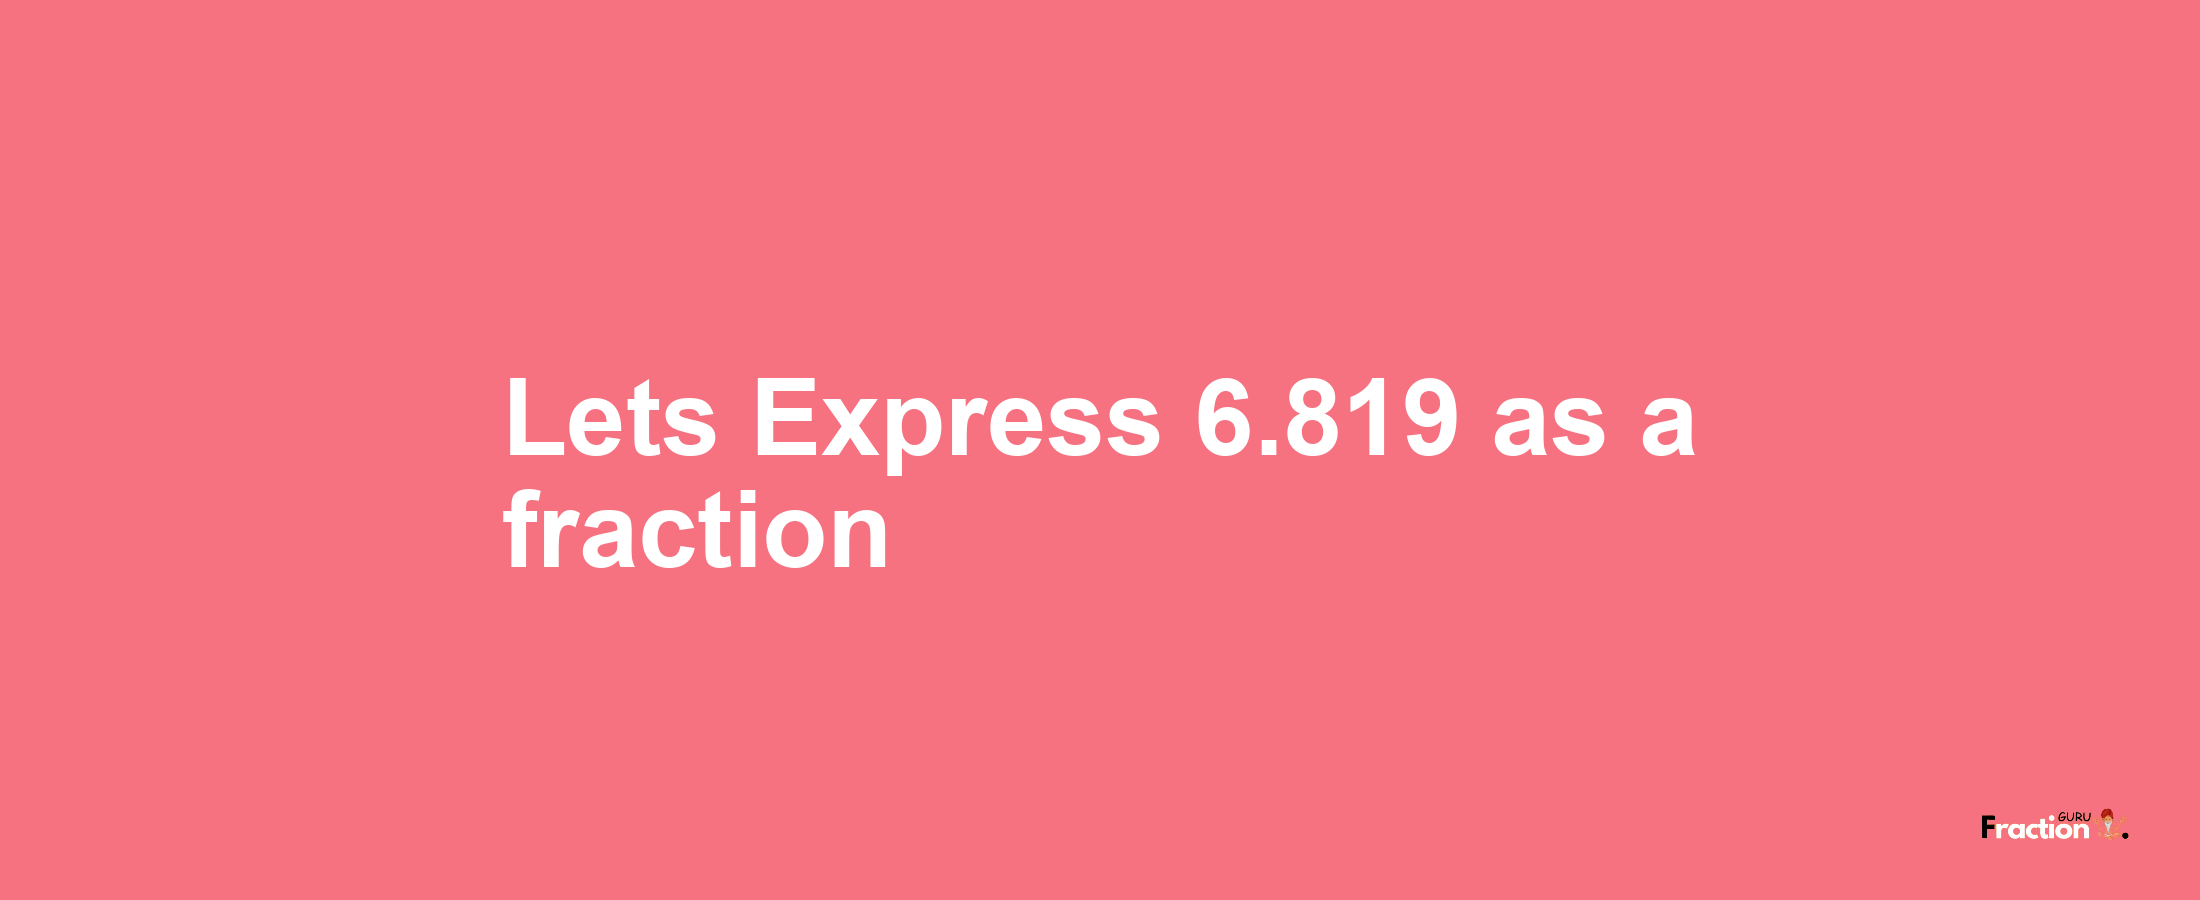 Lets Express 6.819 as afraction